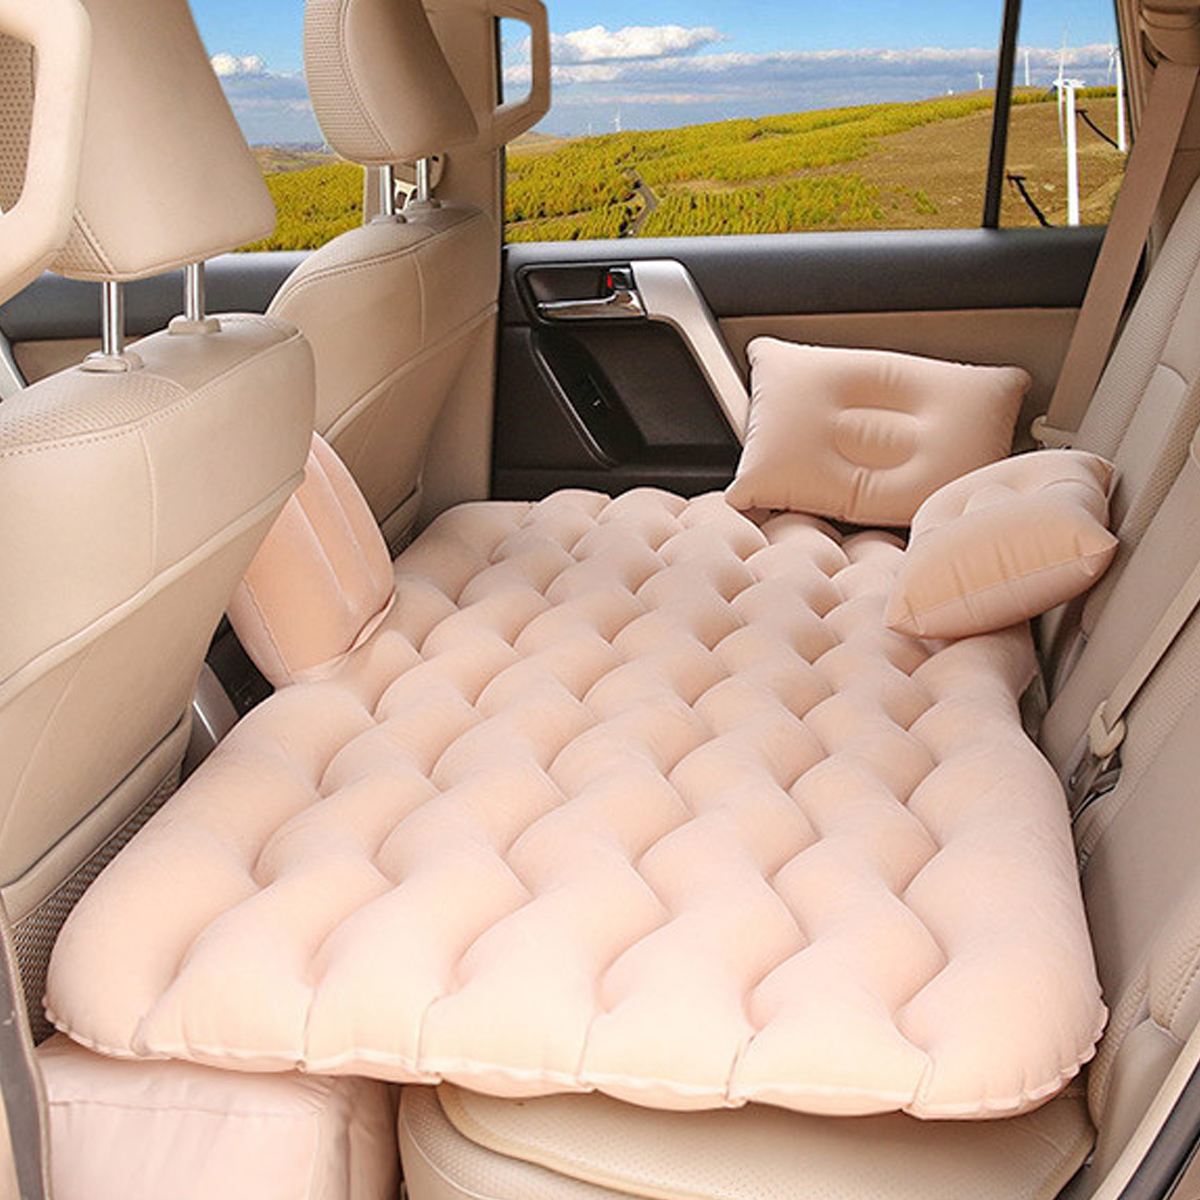 Car-Inflatable-Mat-Outdoor-Traveling-Air-Mattresses-Camping-Folding-Sleeping-Bed-with-Pillows-and-Pu-1612981-6